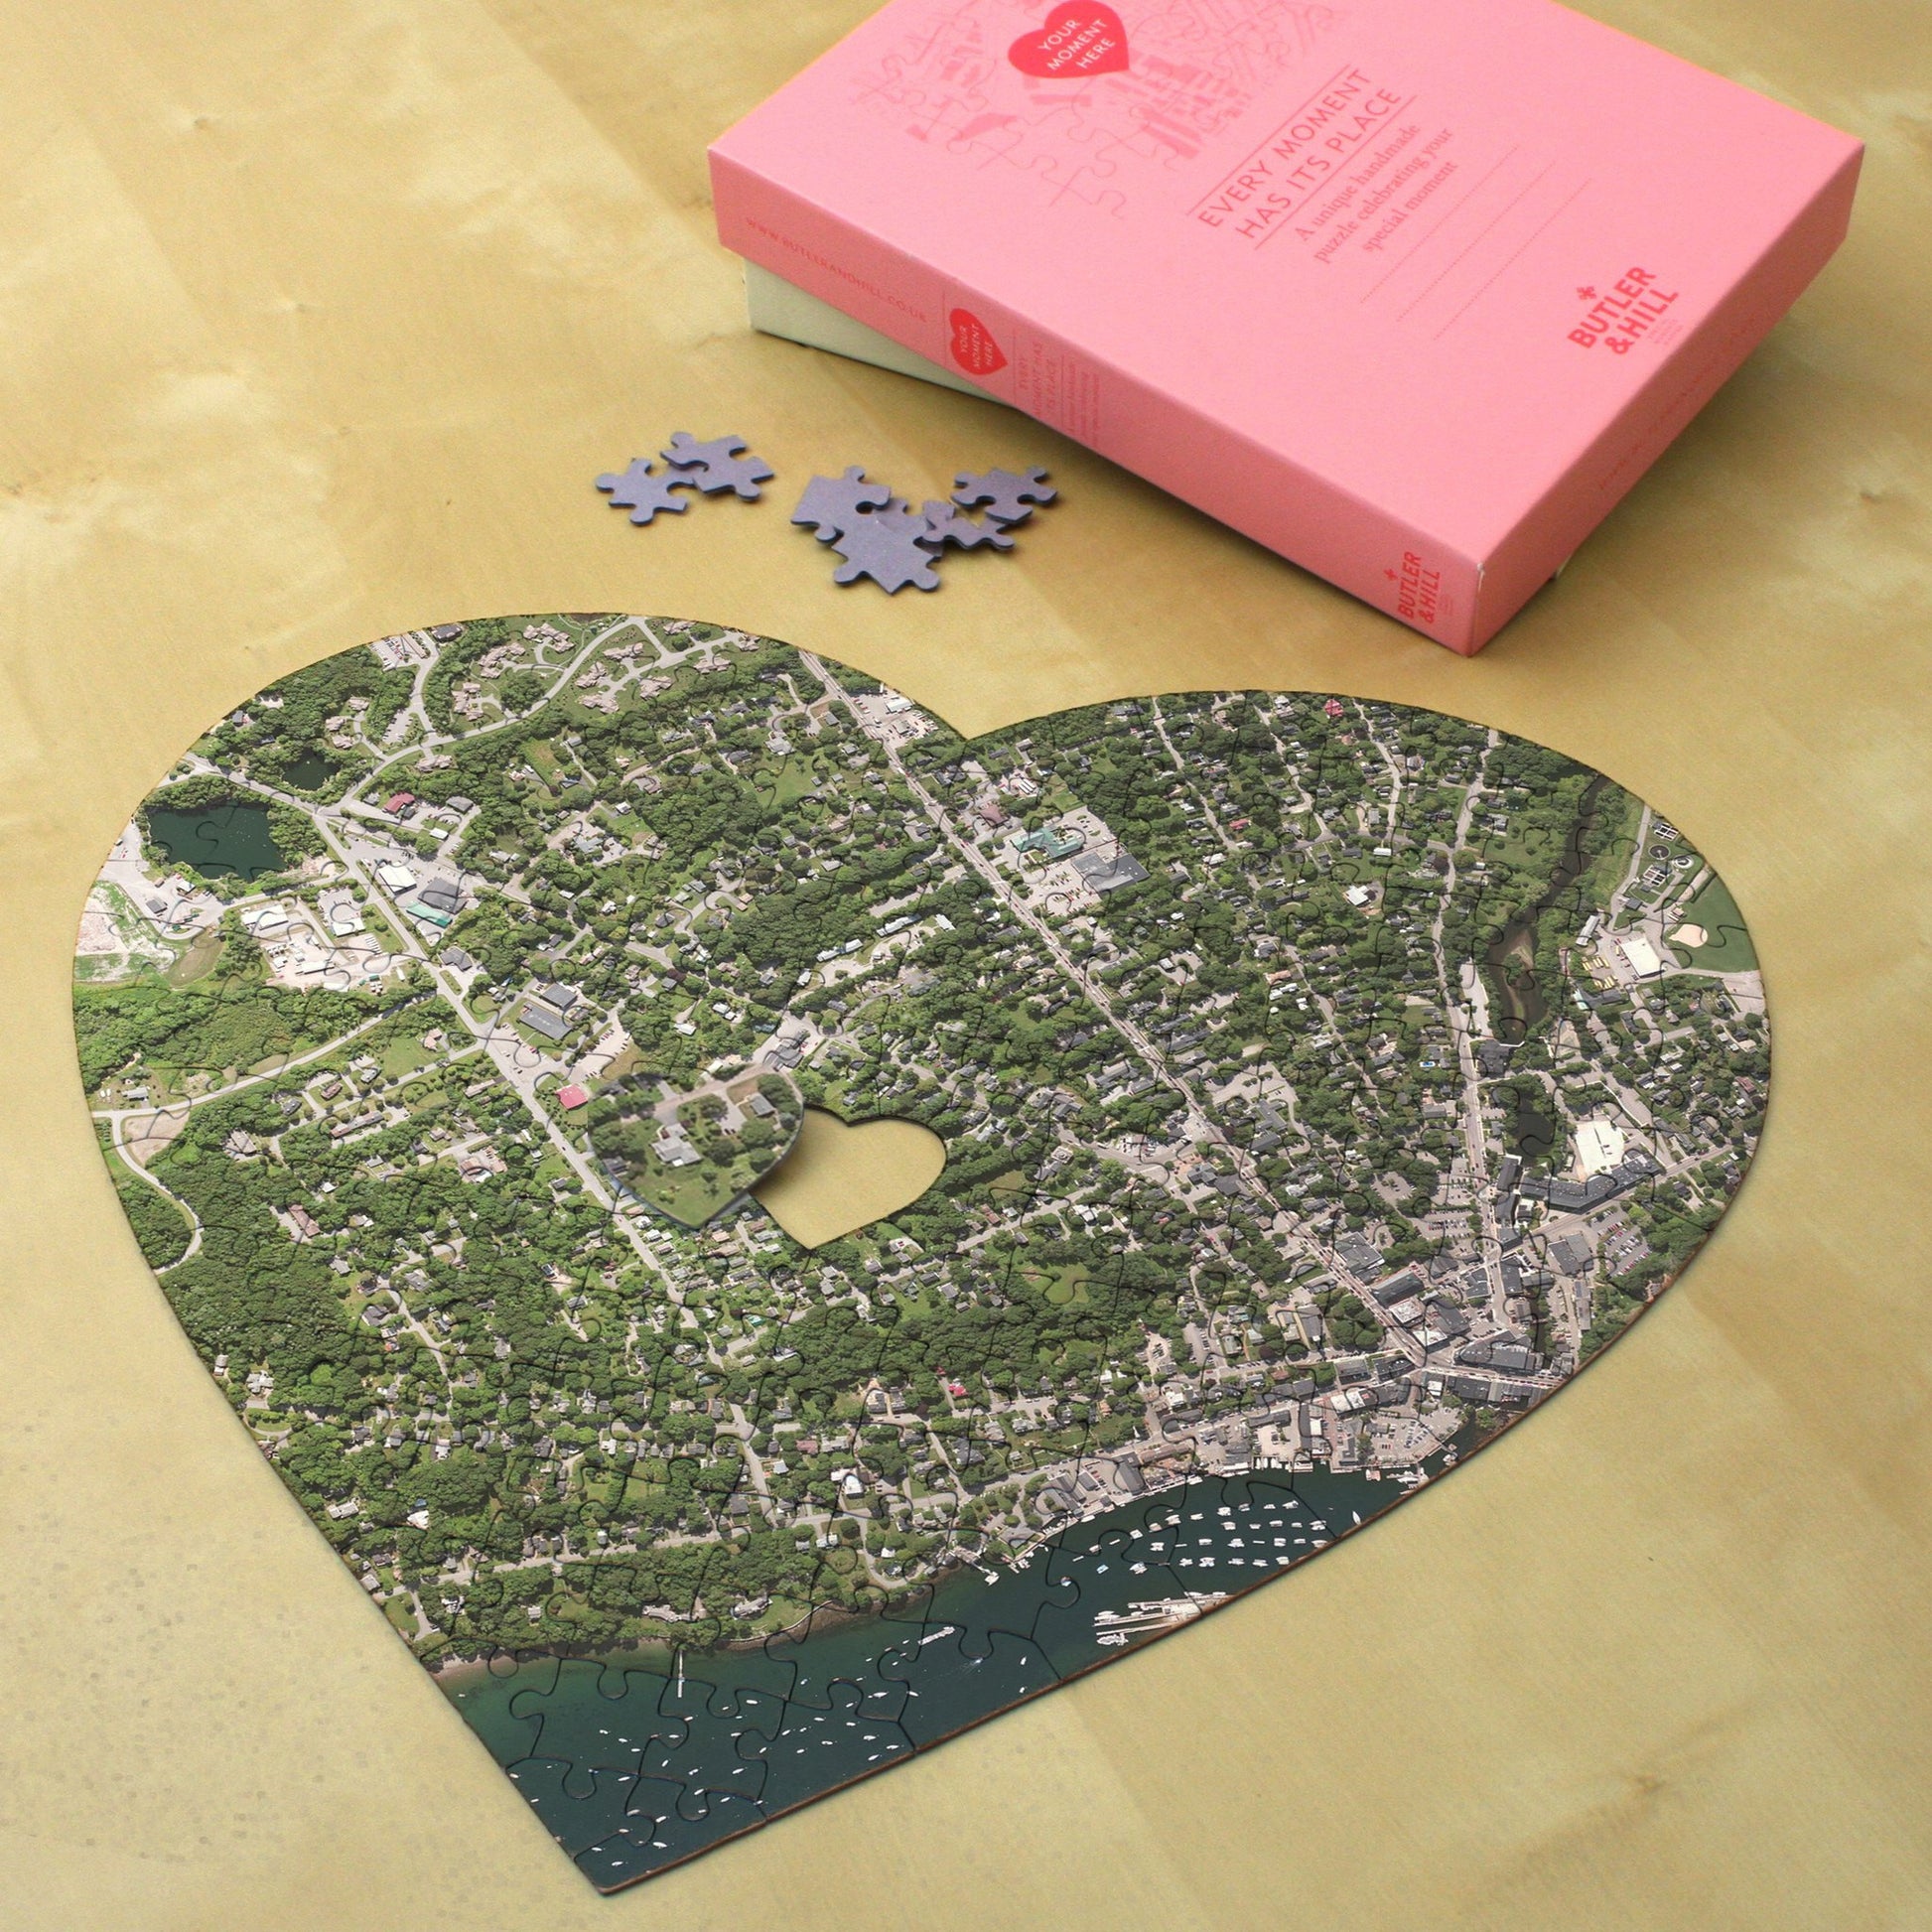 US Jigsaw Puzzle - Heart Shaped Personalized US Map Puzzle